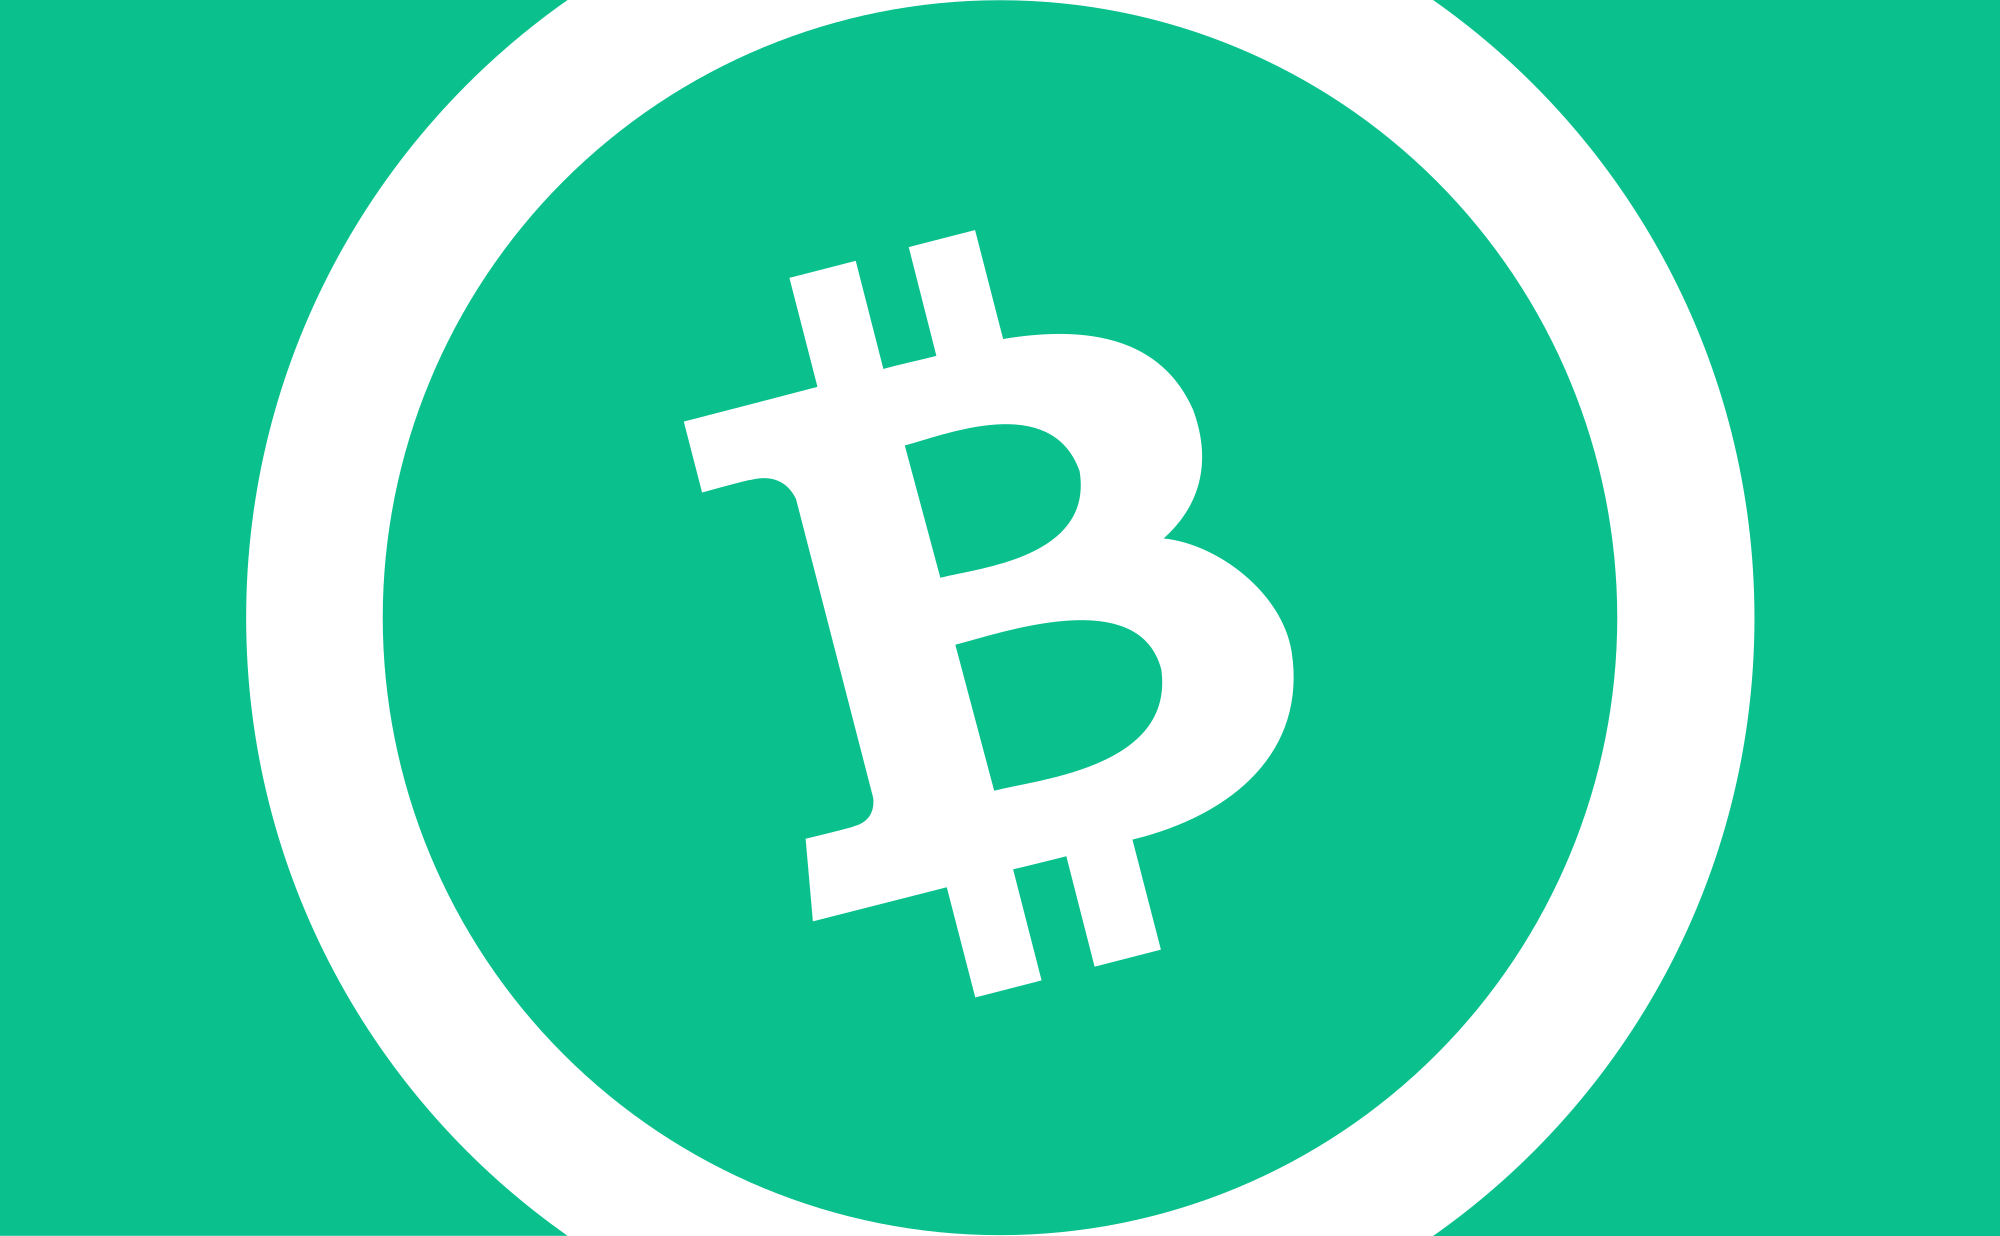 Bitcoin Cash Wallet to Store BCH coin - Freewallet - APK Download for Android | Aptoide